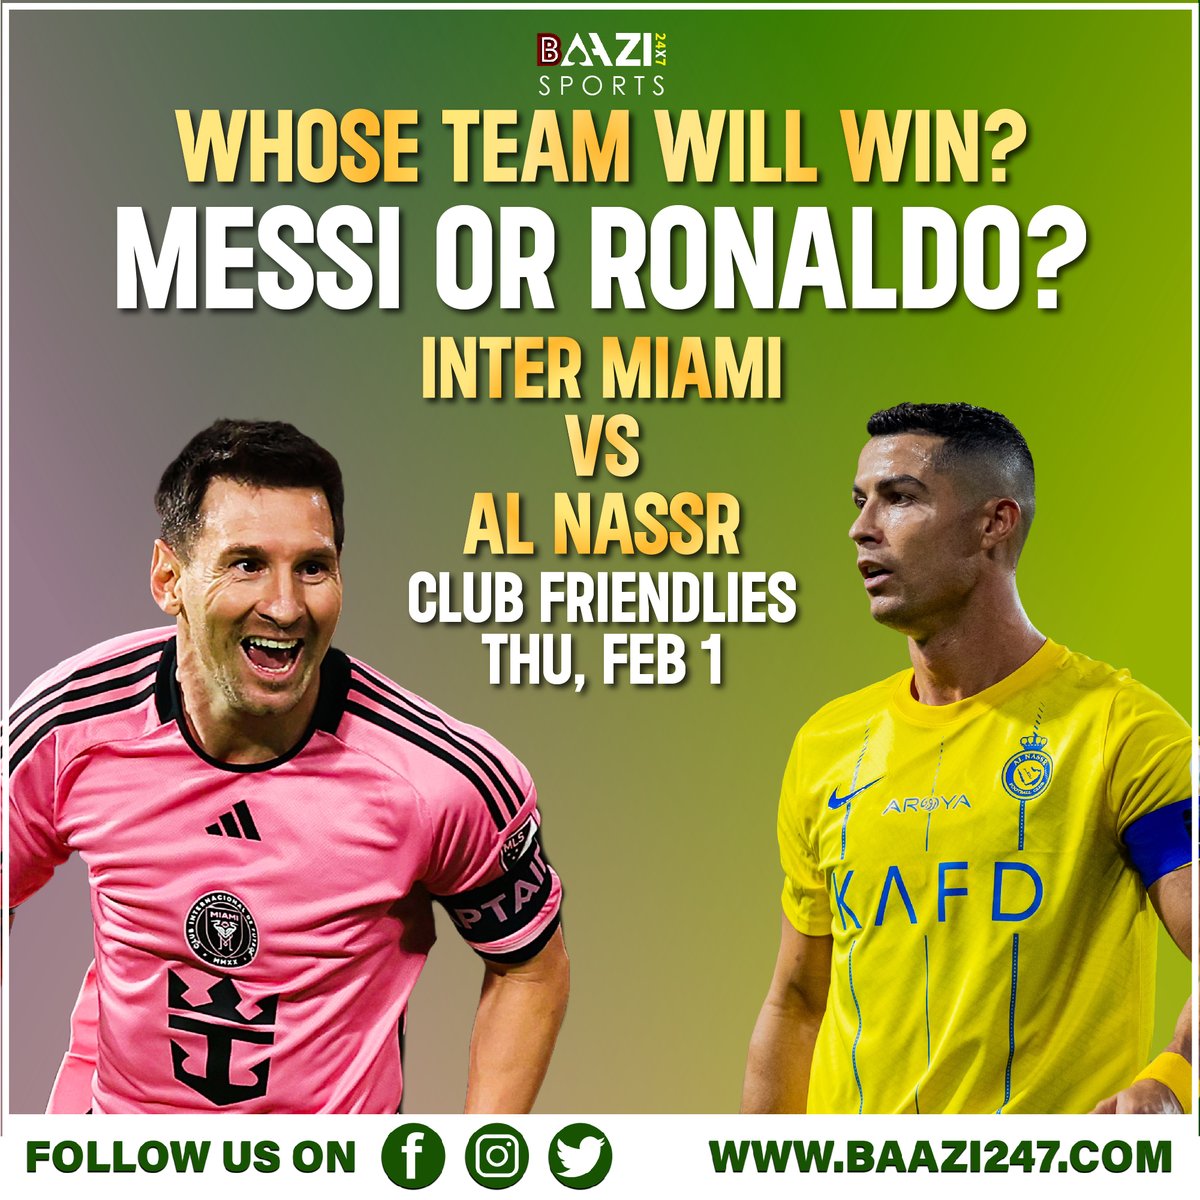 🔥 Football fever alert! ⚽ On Feb 1, it's Messi's magic vs Ronaldo's prowess as Inter Miami takes on Al Nassr in a friendly clash! Who do you think will emerge victorious? Let the predictions roll in! 🌟🏆

#baazi247sports #MessiVsRonaldo #cr7 #Messi10 #InterMiamiVsAlNassr